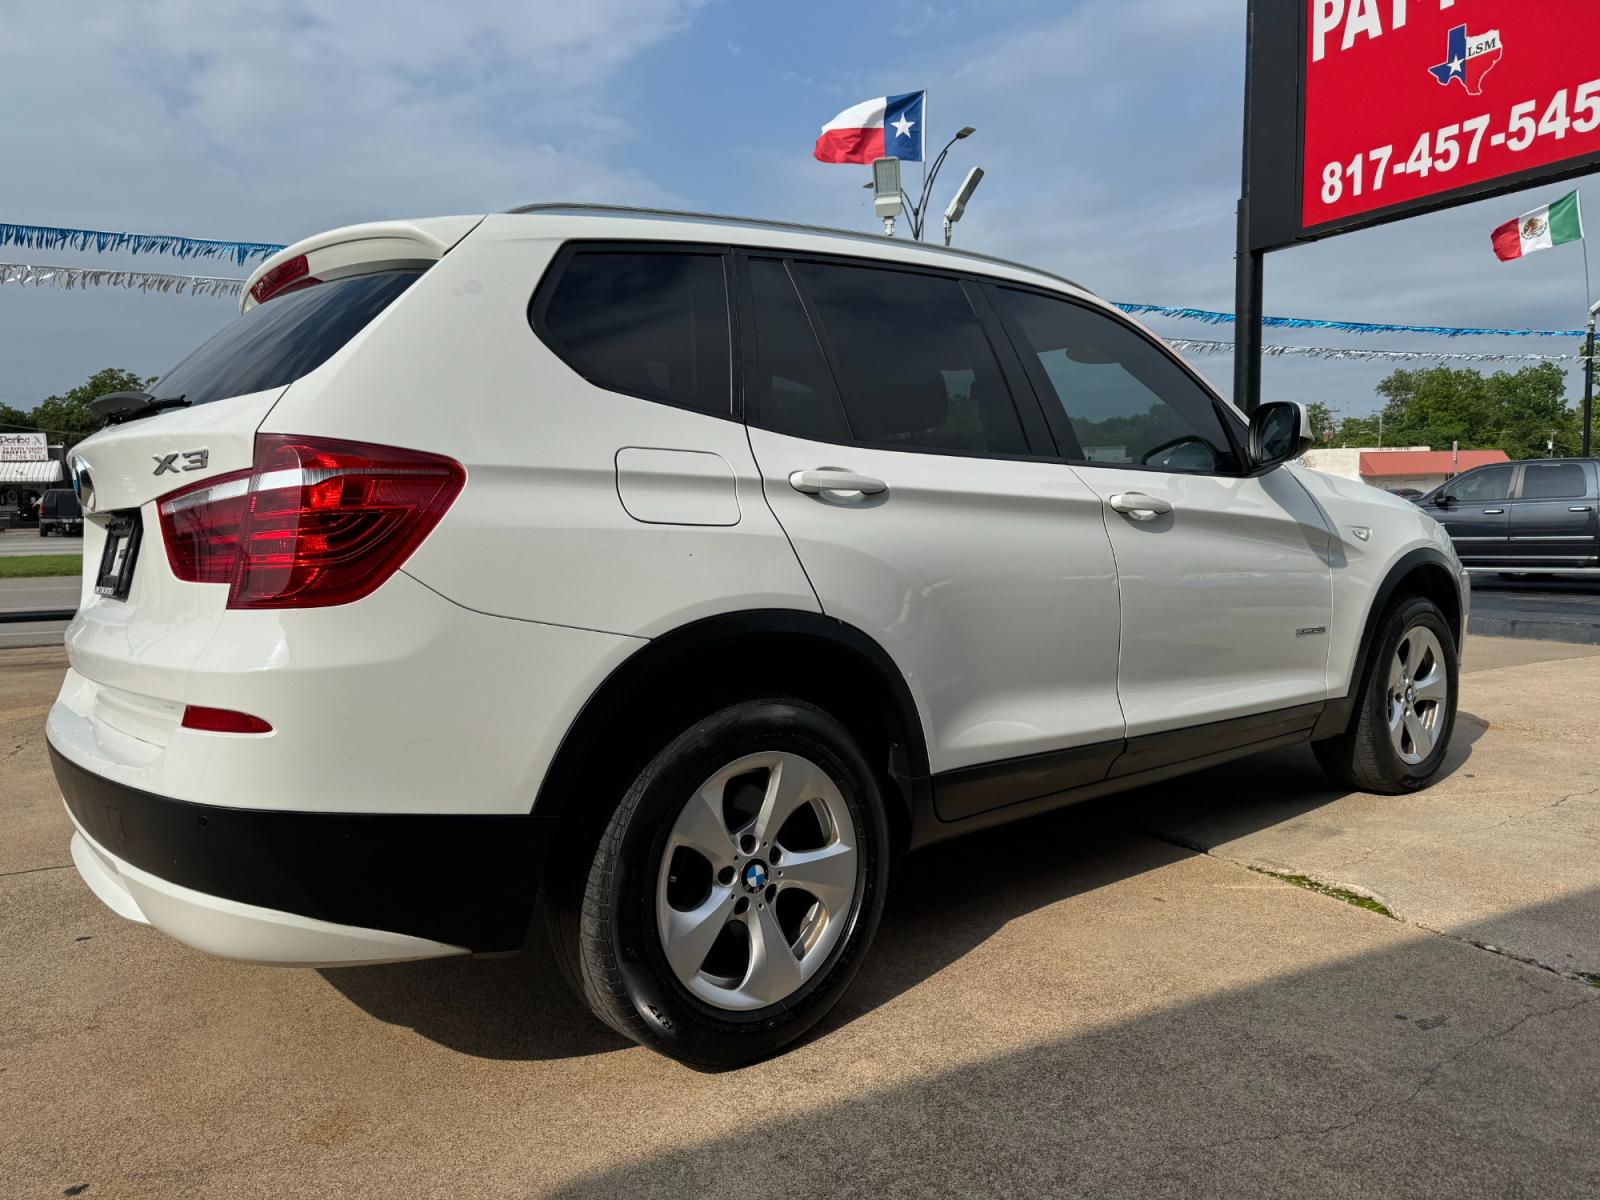 2011 WHITE BMW X3 (5UXWX5C59BL) , located at 5900 E. Lancaster Ave., Fort Worth, TX, 76112, (817) 457-5456, 0.000000, 0.000000 - This is a 2011 BMW X3 XDRIVE 28I LUXURY 4 DR WAGON that is in excellent condition. The interior is clean with no rips or tears or stains. All power windows, door locks and seats. Ice cold AC for those hot Texas summer days. It is equipped with a CD player, AM/FM radio. It runs and drives like new. T - Photo #3